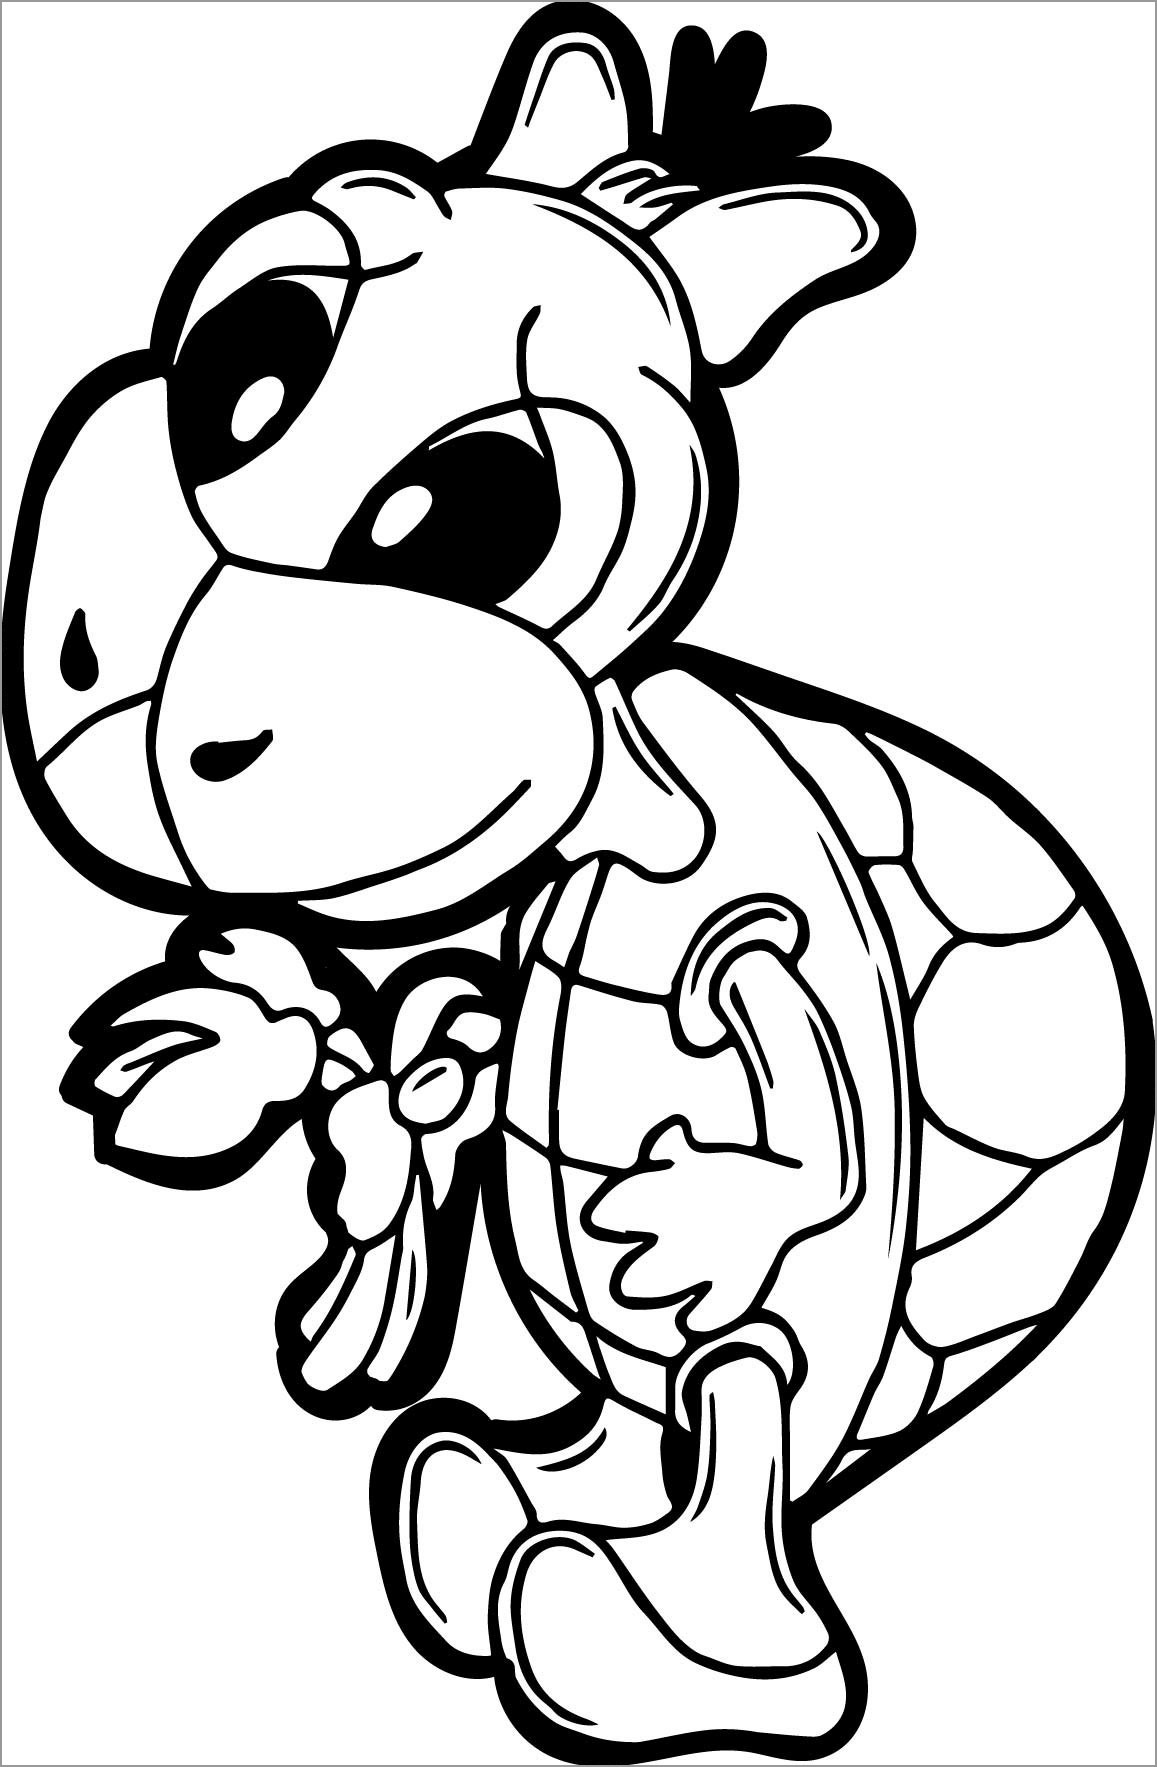 Cartoon tortoise Coloring Page